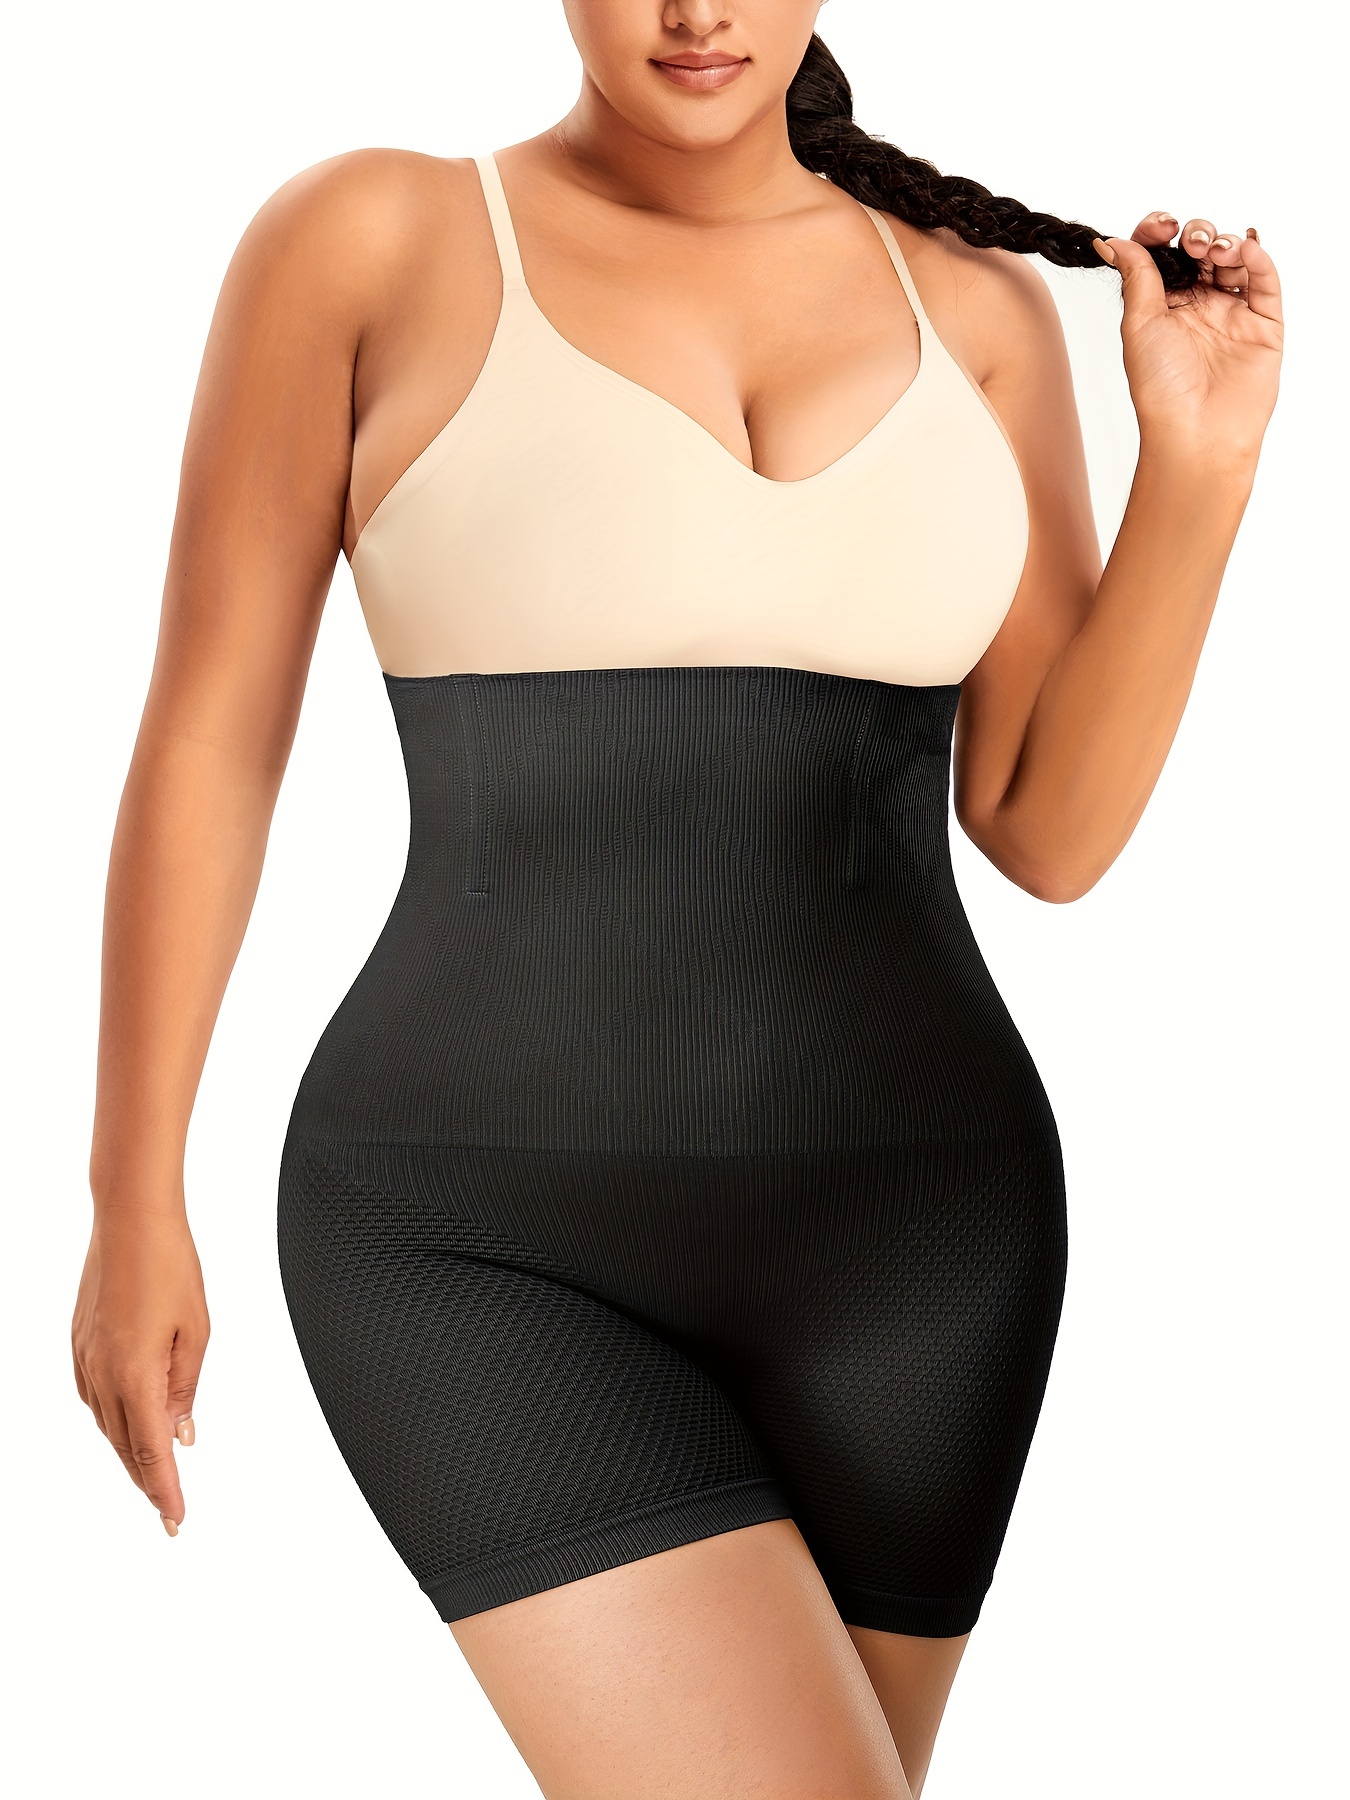 Plus Size Sexy Shapewear, Women's Plus Breathable Tummy Control Padded  Invisible Hook & Eye Crotch Design Underdress Shaping Bodysuit